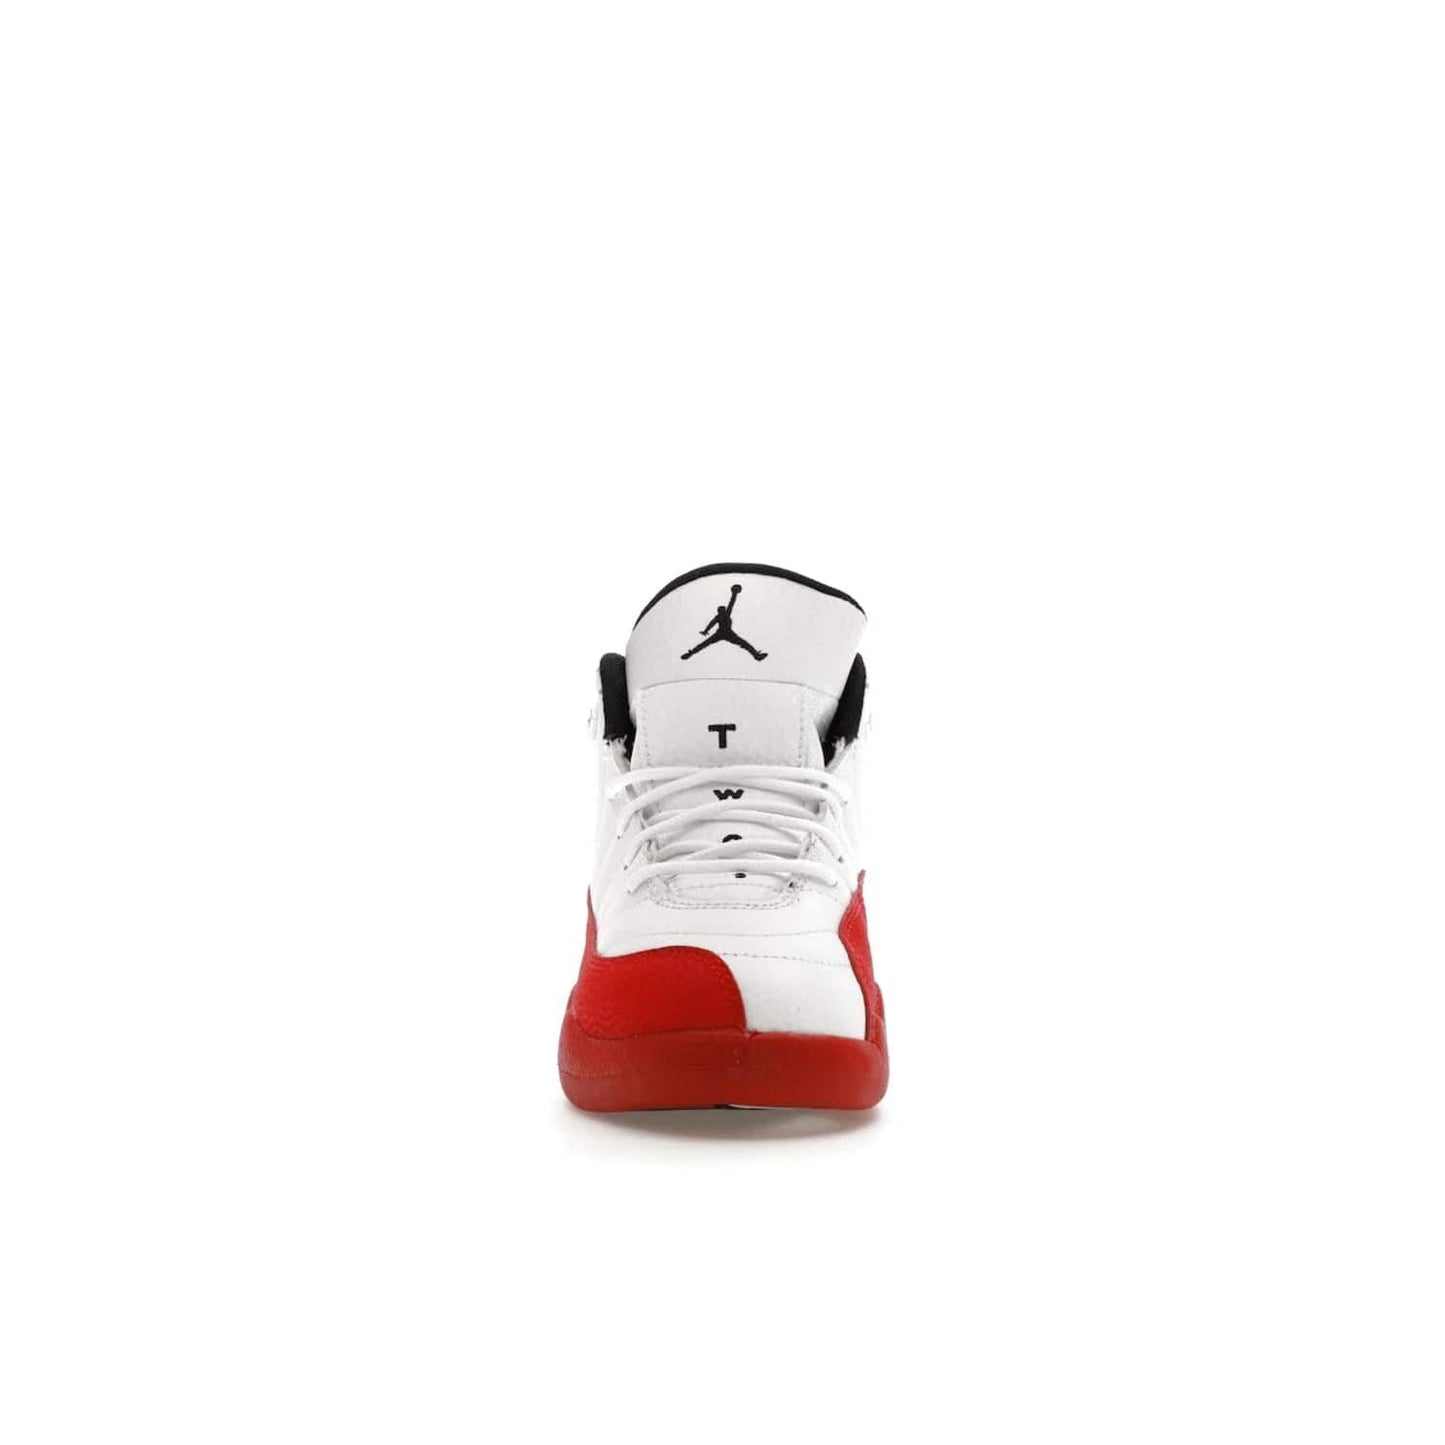 Jordan 12 Retro Cherry (2023) (PS) - Image 10 - Only at www.BallersClubKickz.com - Jordan 12 Retro Cherry dropping for toddlers in 2023! White leather upper with black overlays and red branding. Classic court style for your little one.